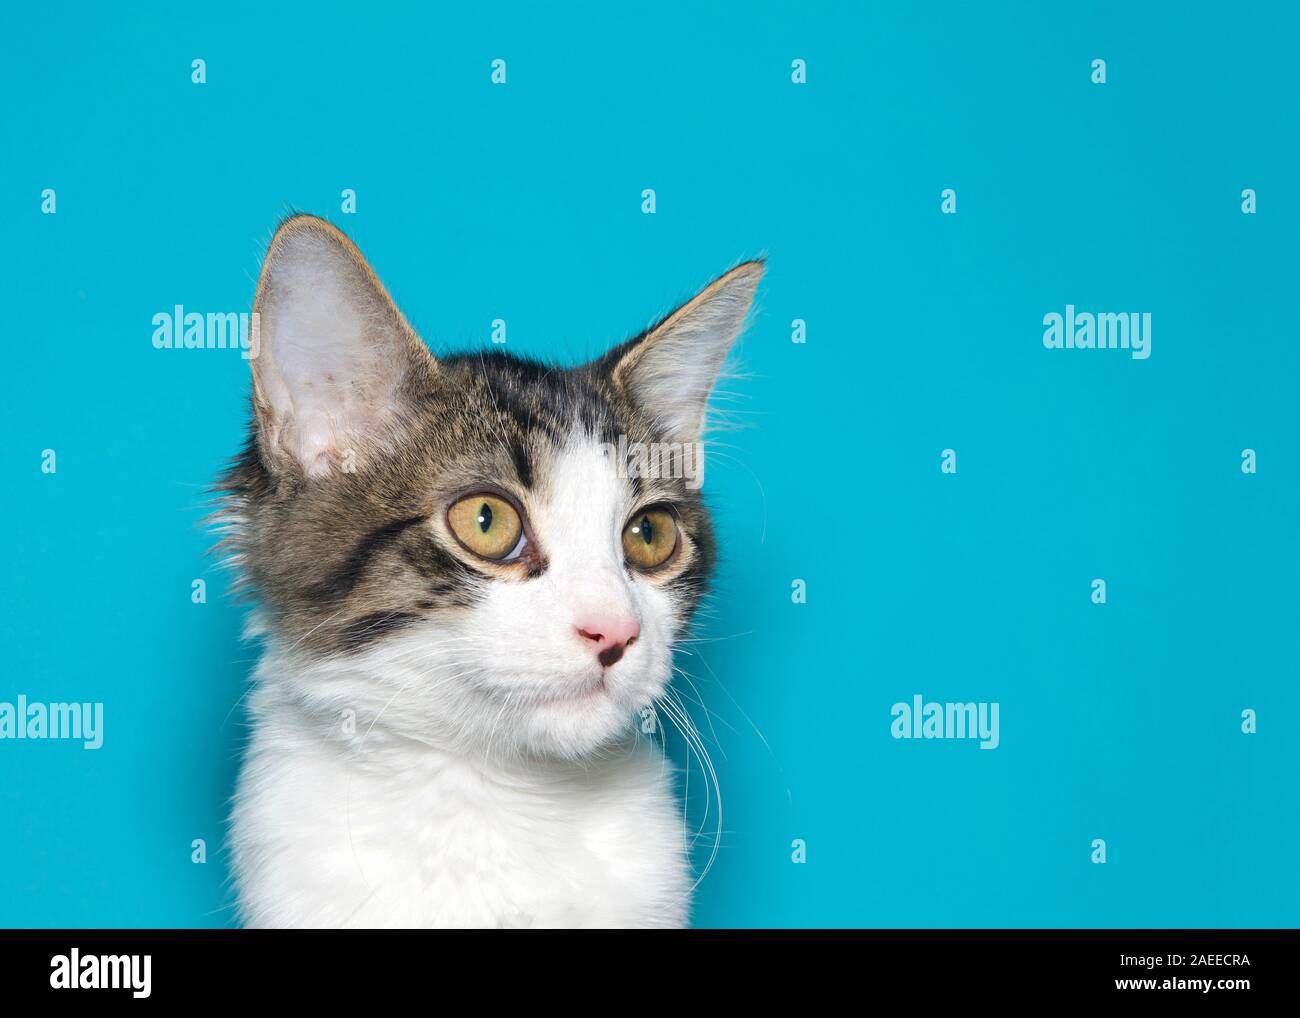 Close up portrait of an adorable white and gray tabby kitten looking to viewers right. Turquoise teal background with copy space. Stock Photo